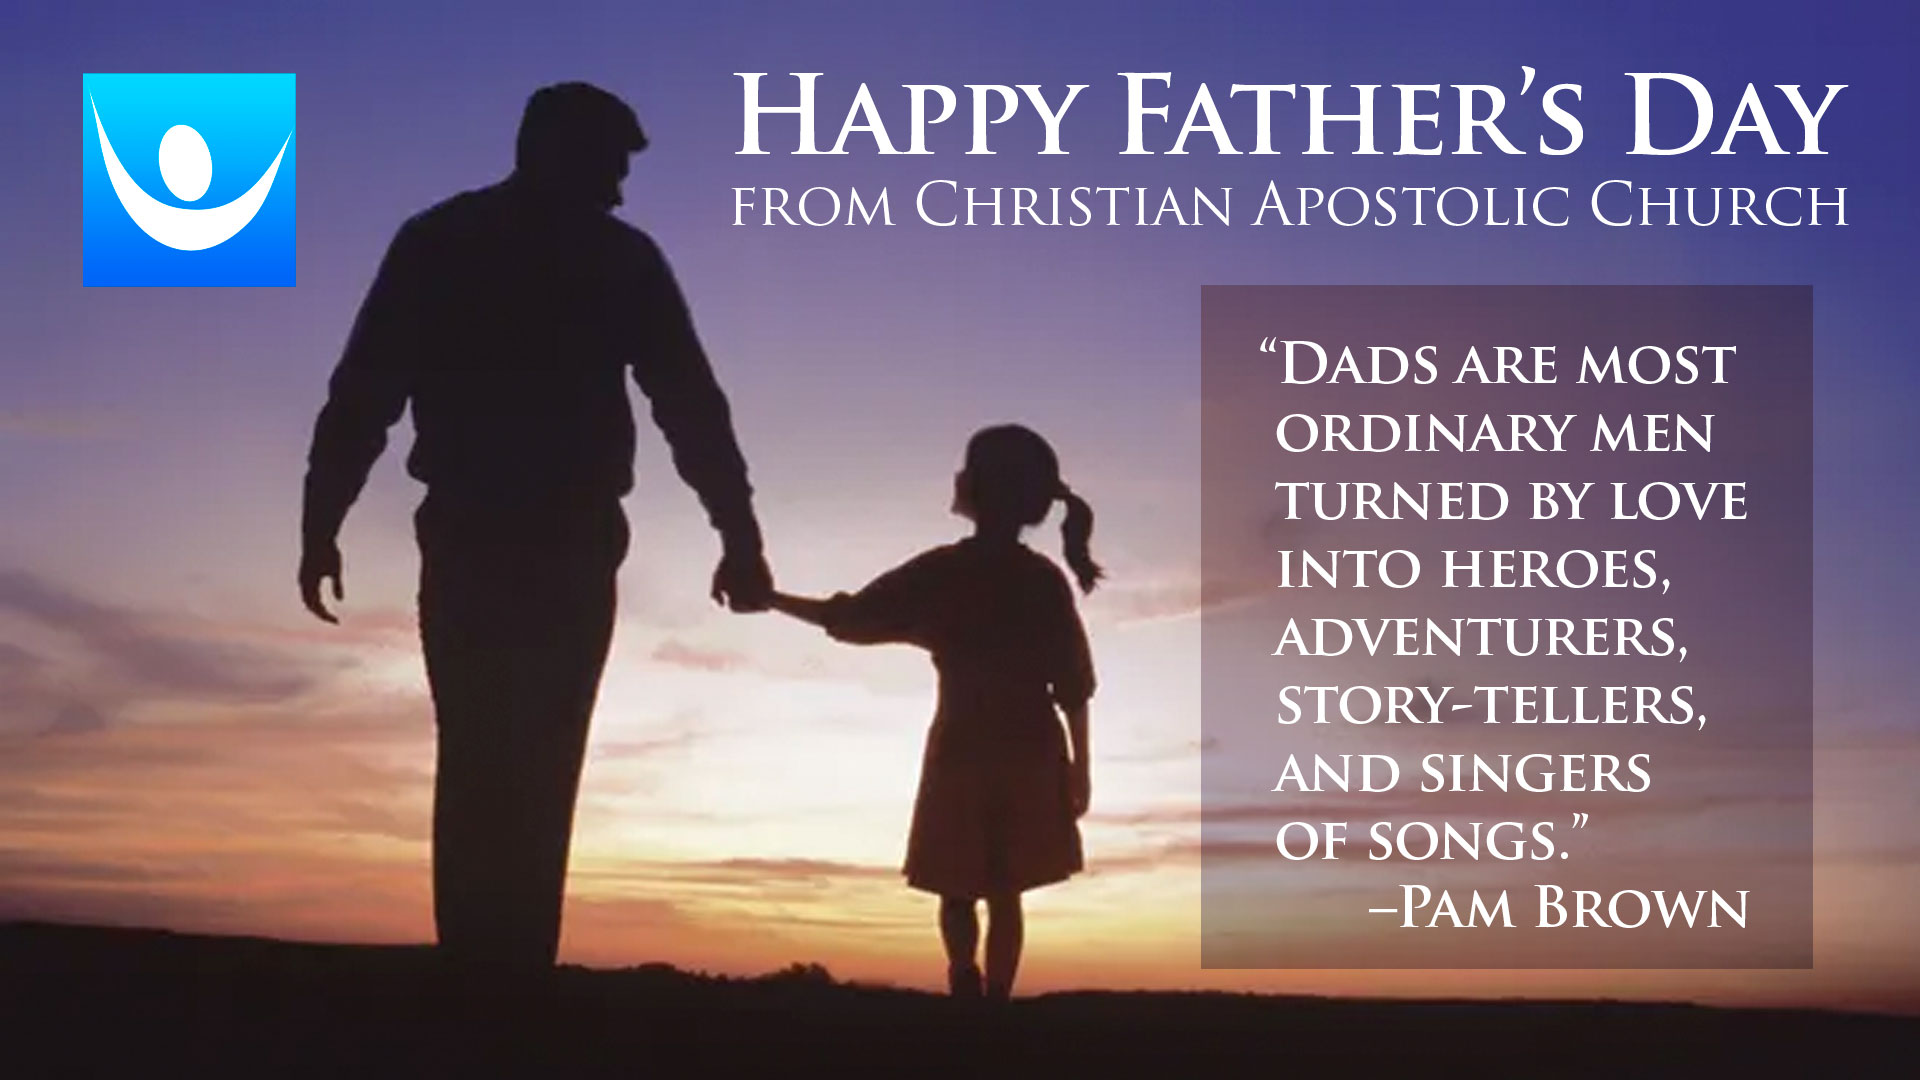 Happy Father’s Day from Christian Apostolic Church